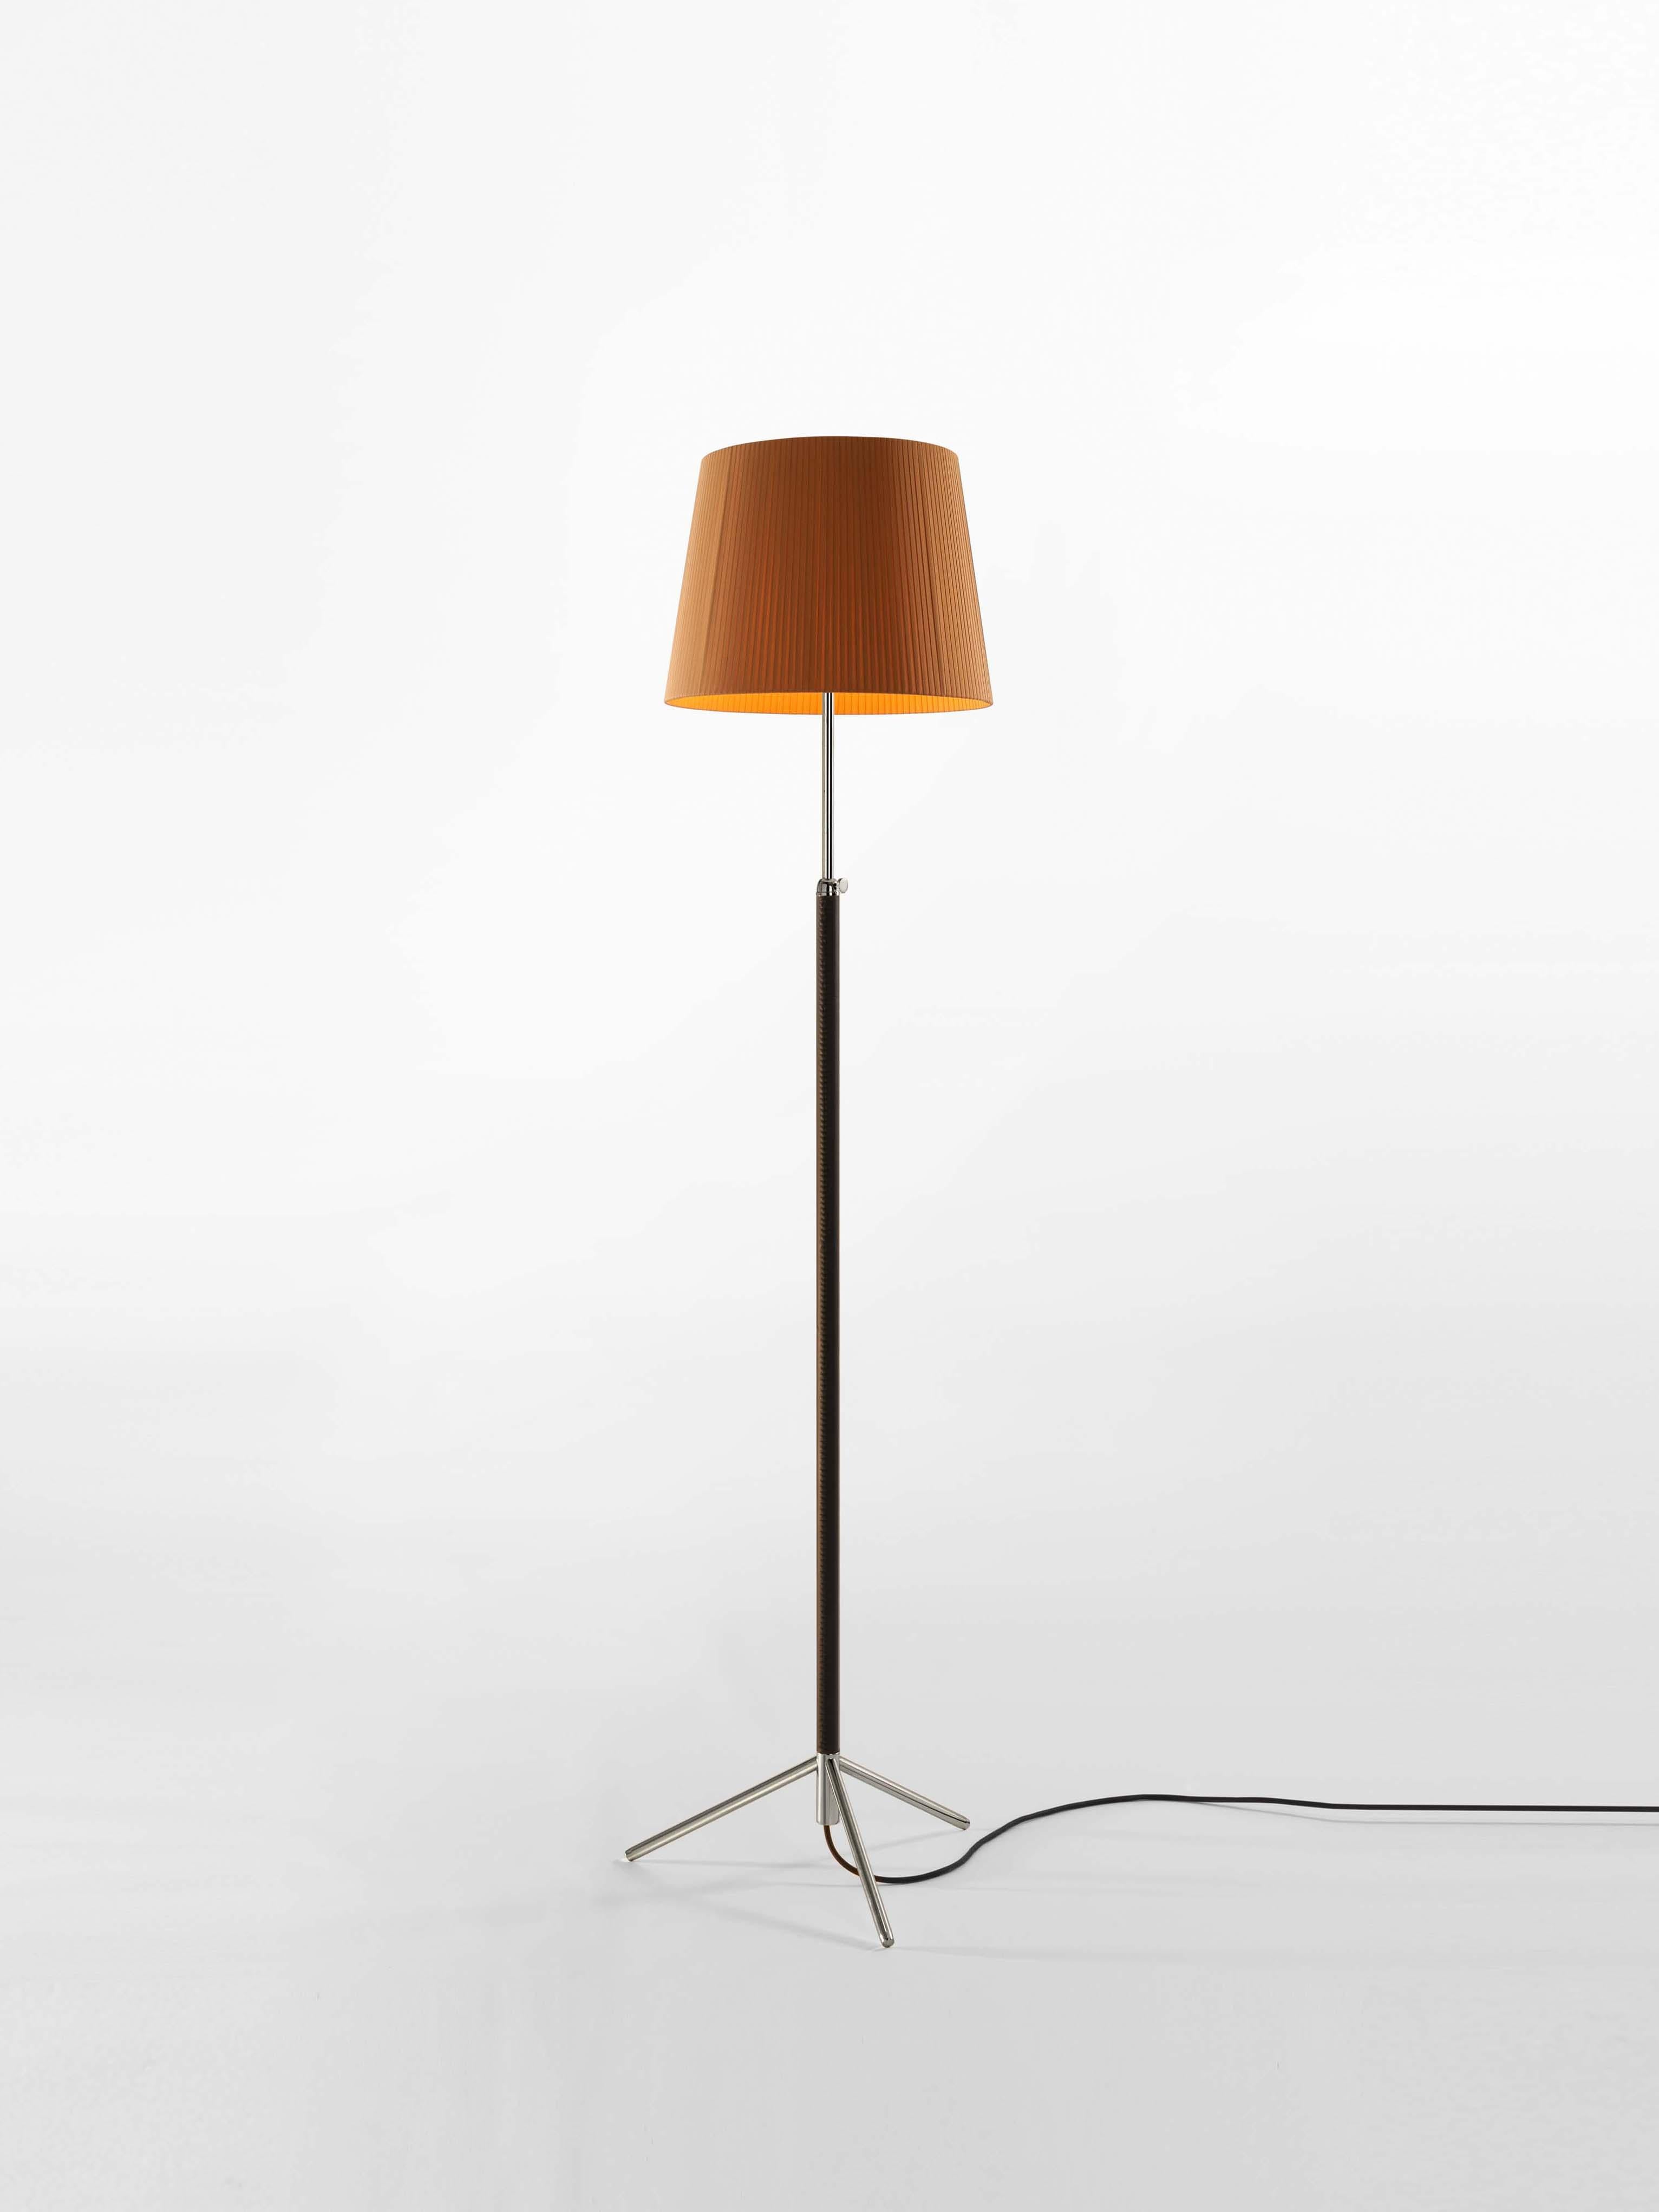 Mustard and chrome Pie de Salón G3 floor lamp by Jaume Sans.
Dimensions: D 40 x H 120-160 cm.
Materials: Metal, leather, ribbon.
Available in chrome-plated or polished brass structure.
Available in other shade colors and sizes.

This slender